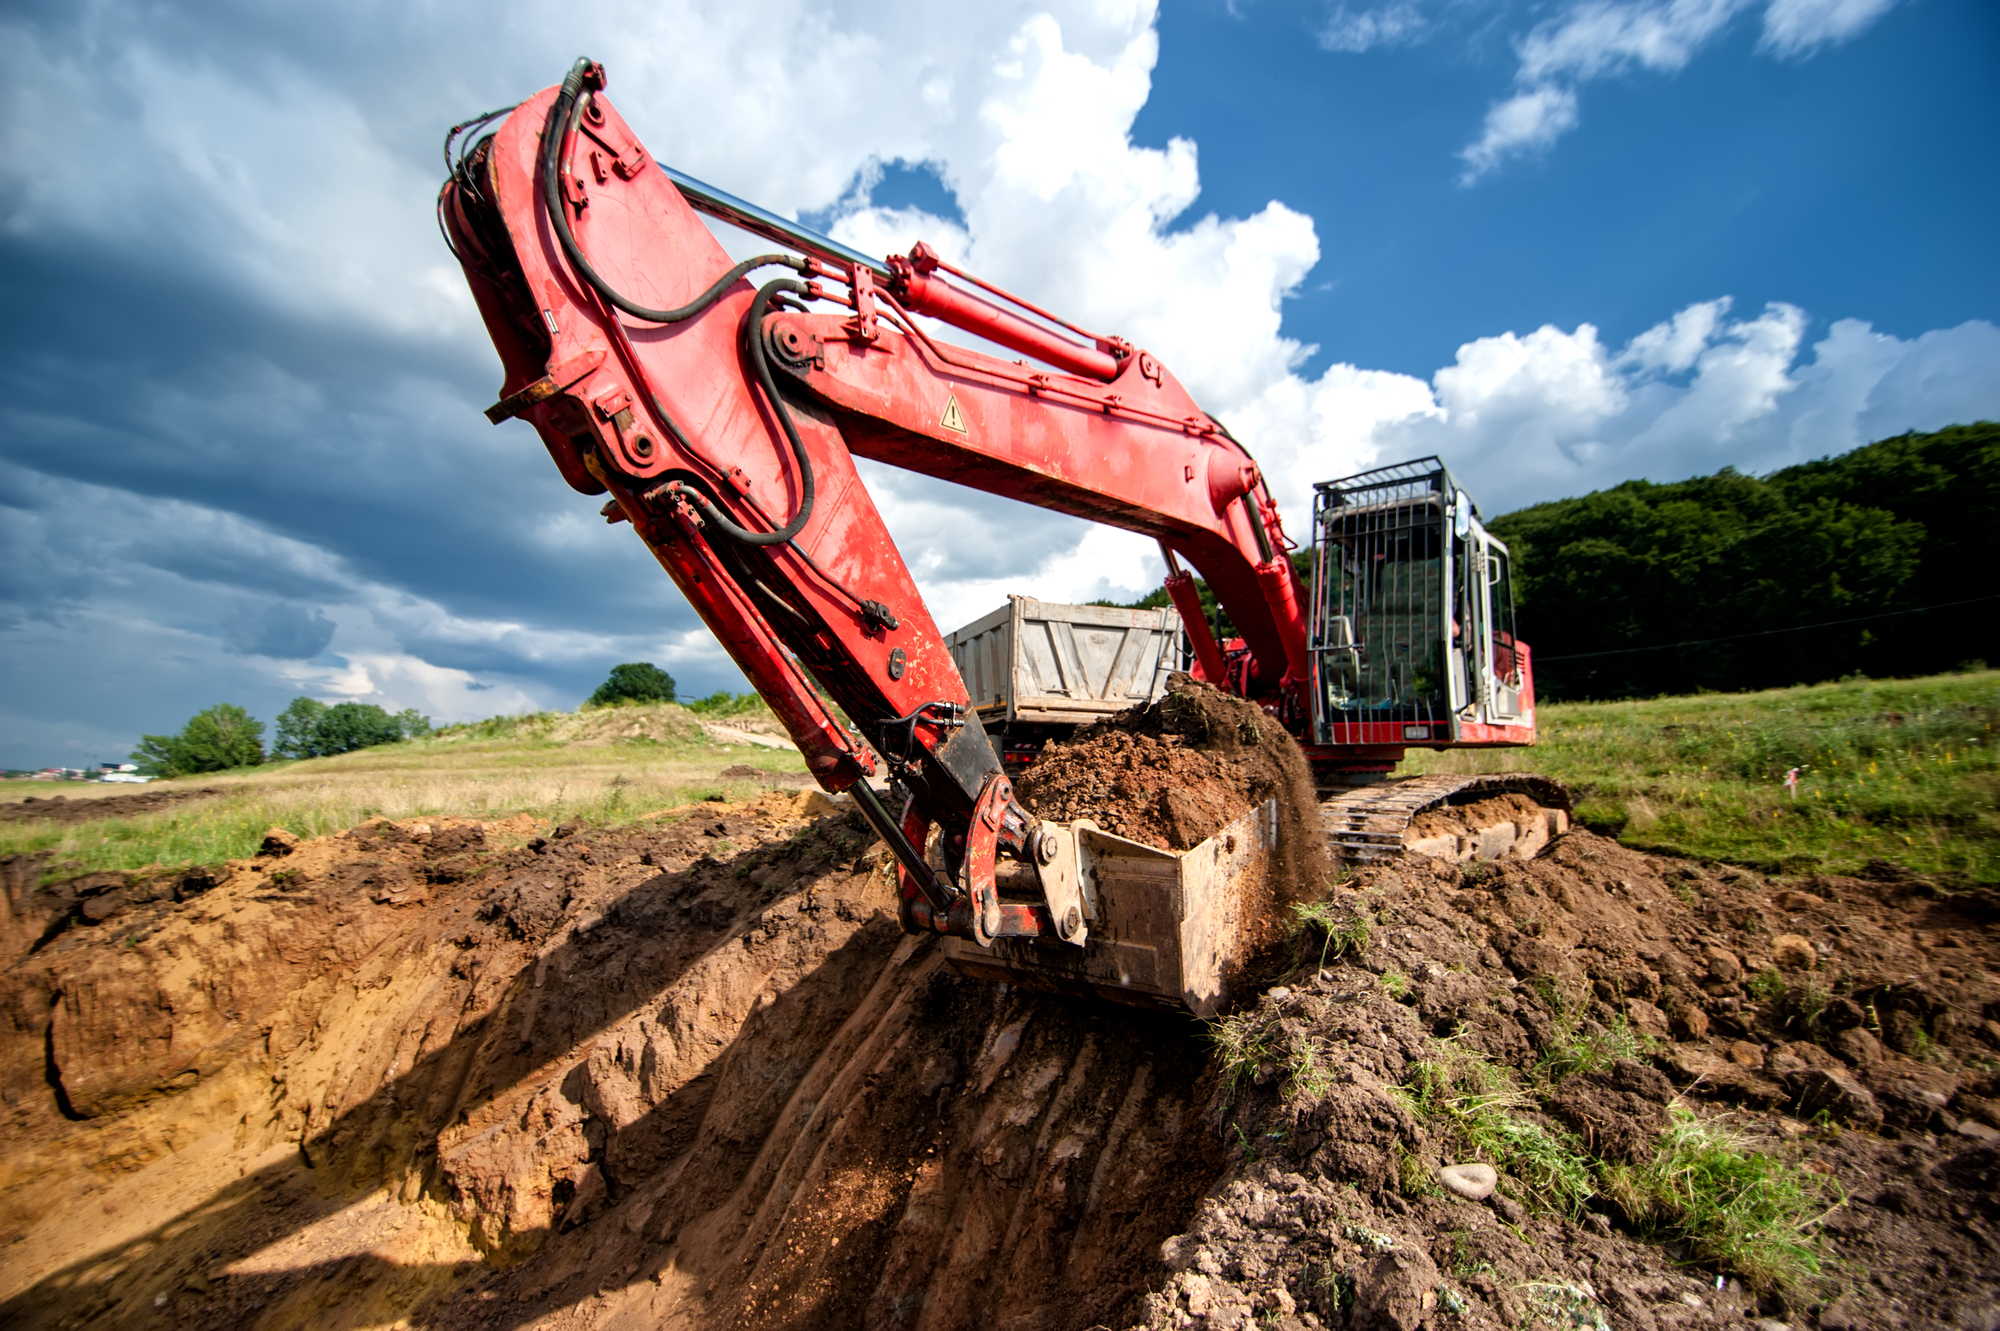 3 Advantages of Hiring an Excavation Contractor for Your Project